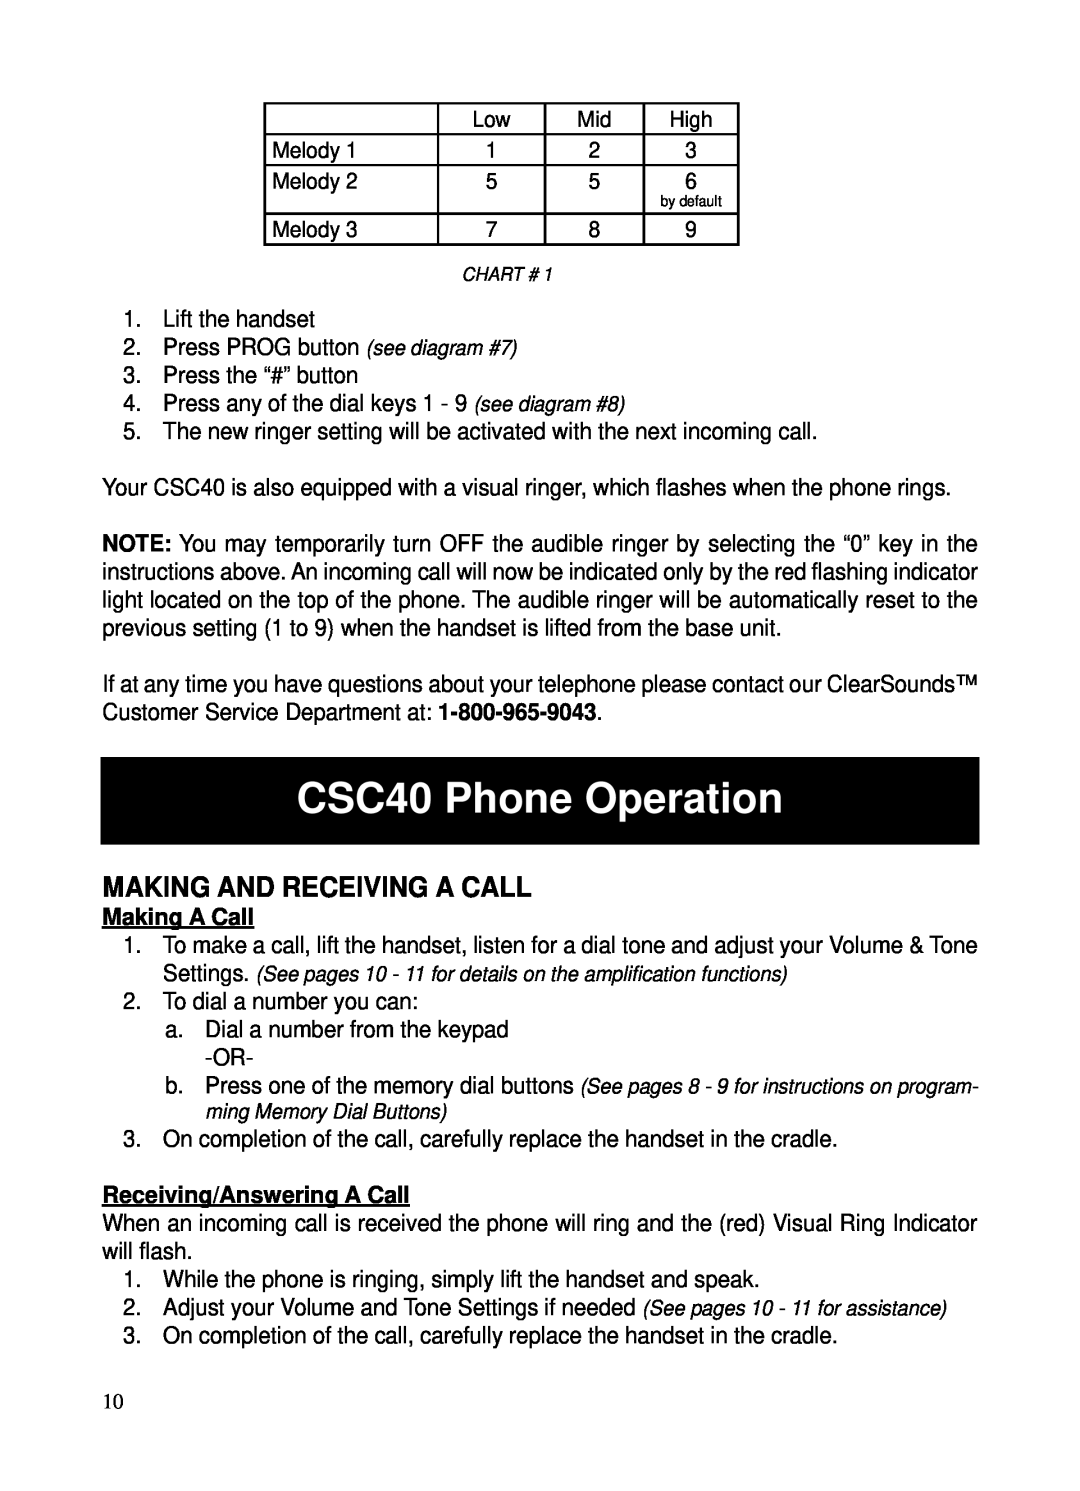 ClearSounds user manual CSC40 Phone Operation, Making And Receiving A Call, Making A Call, Receiving/Answering A Call 